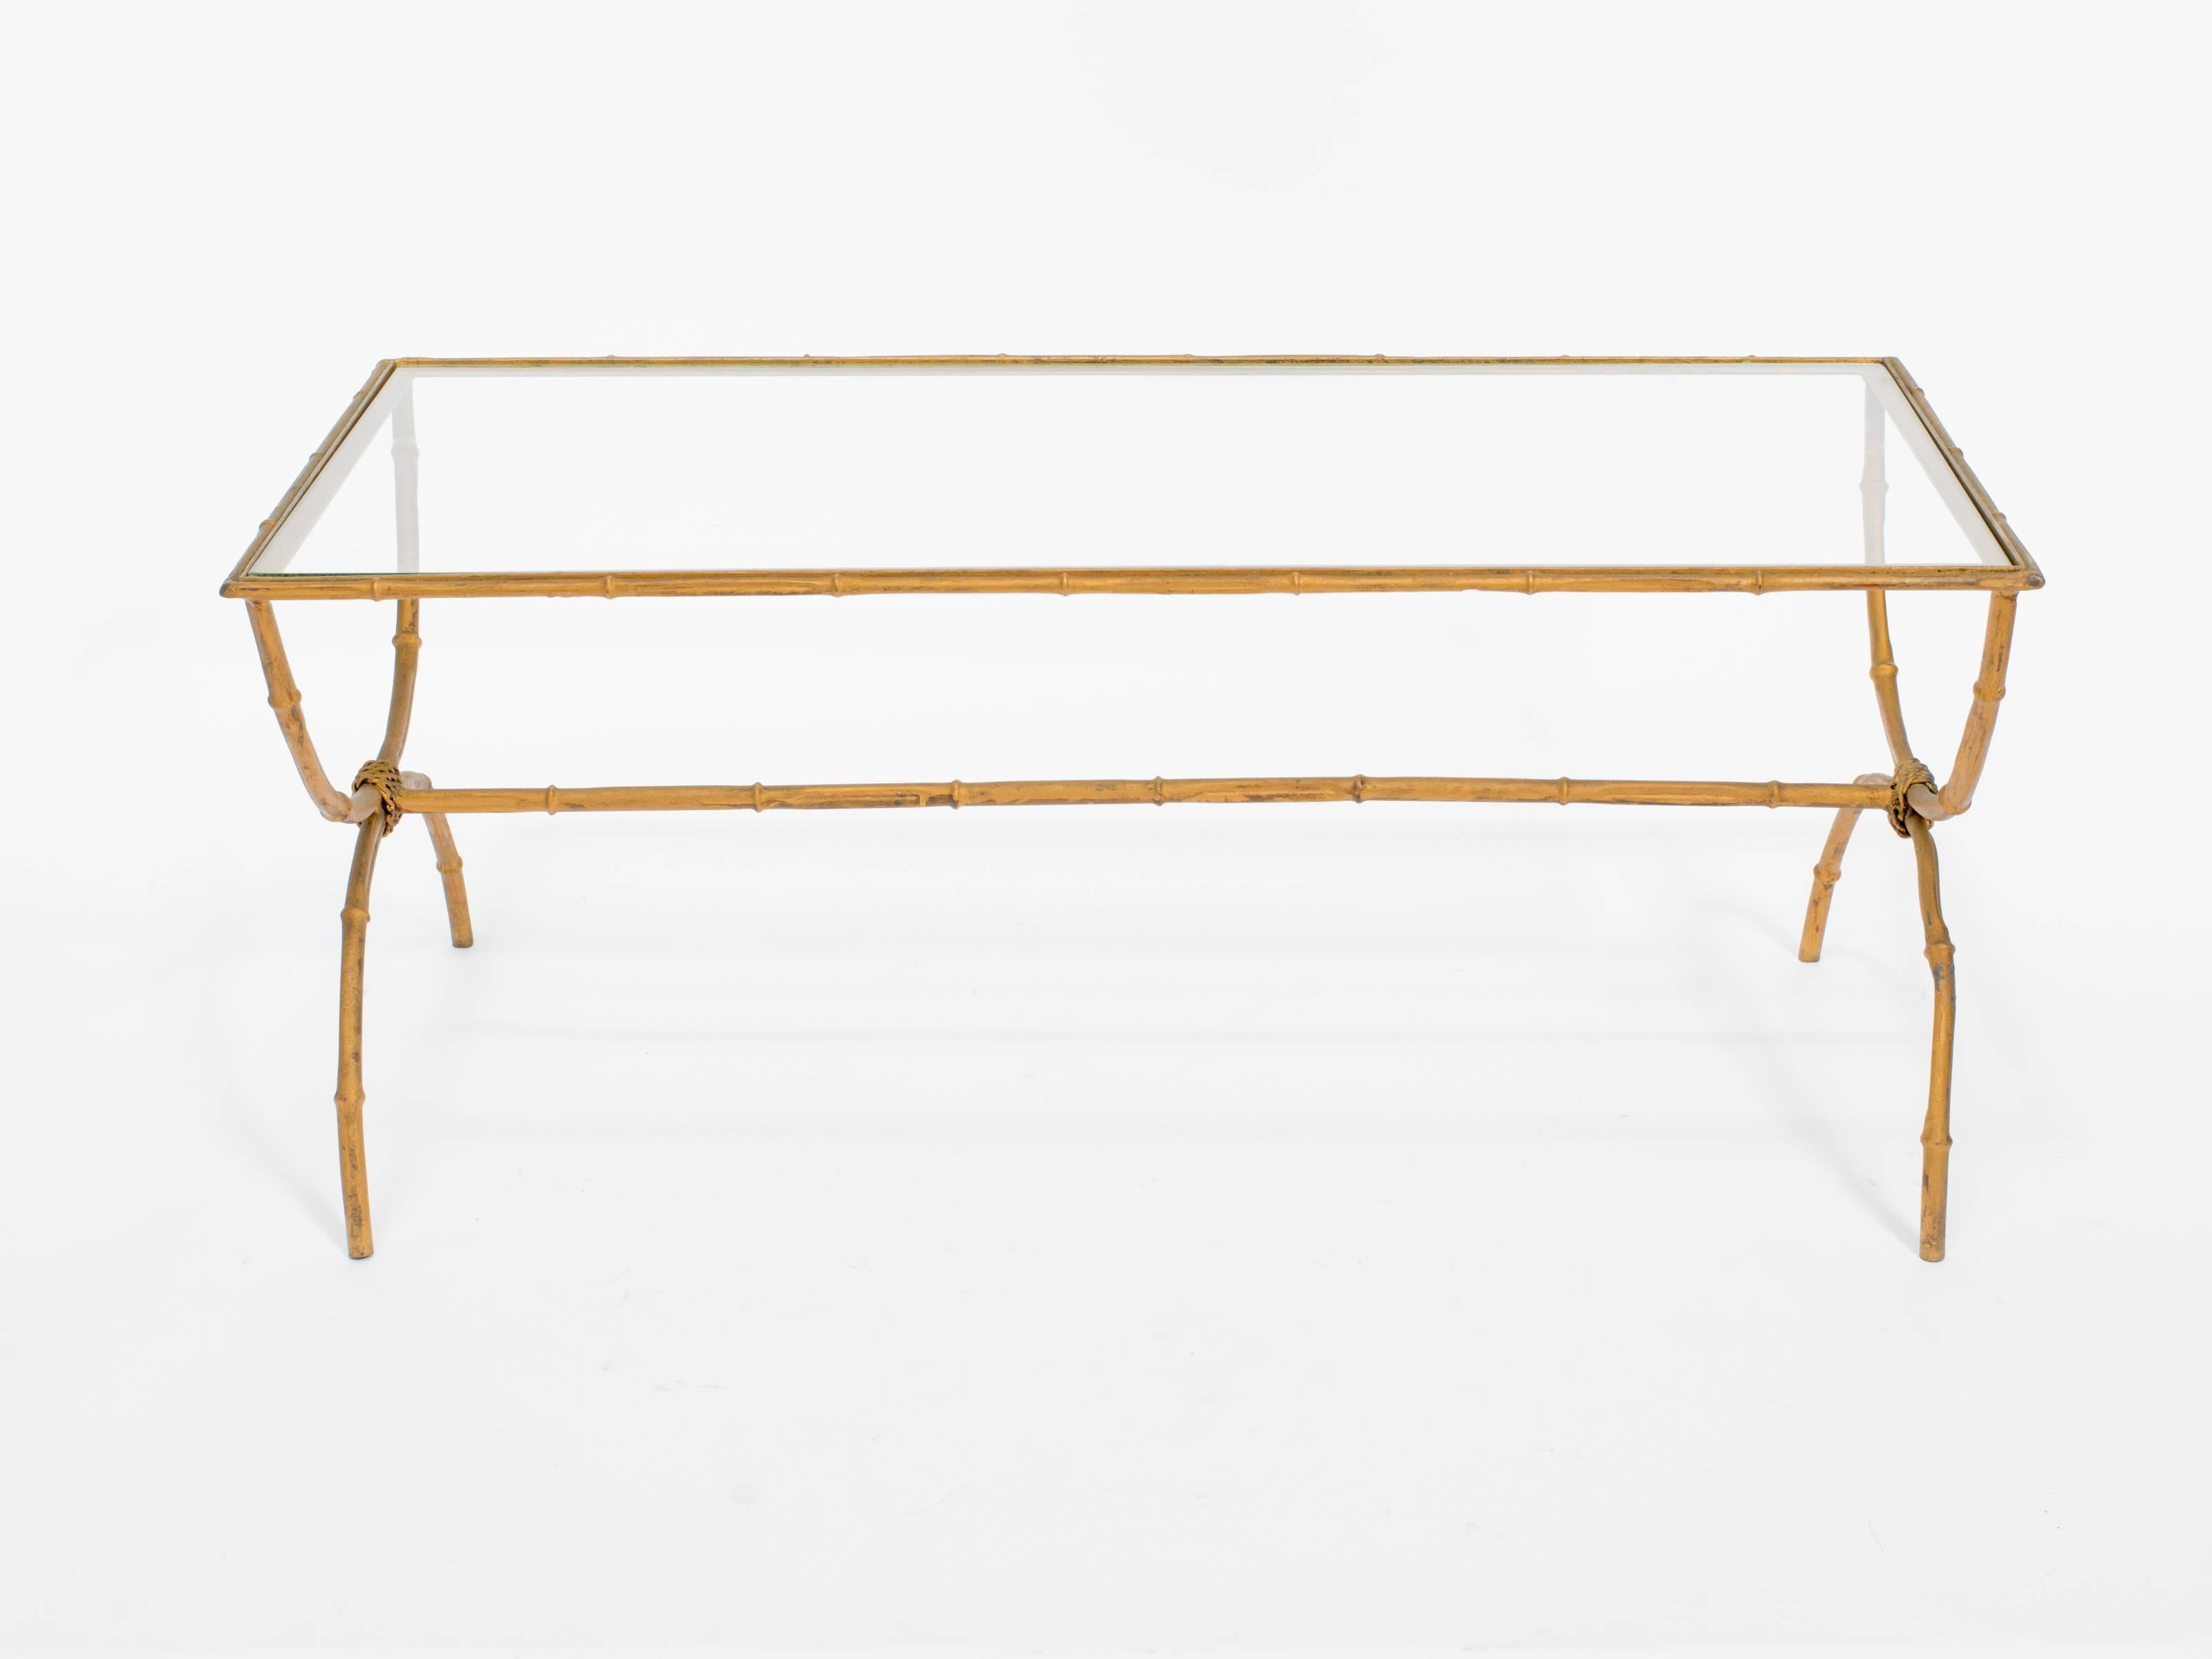 Gilt metal faux bamboo coffee table with glass top.